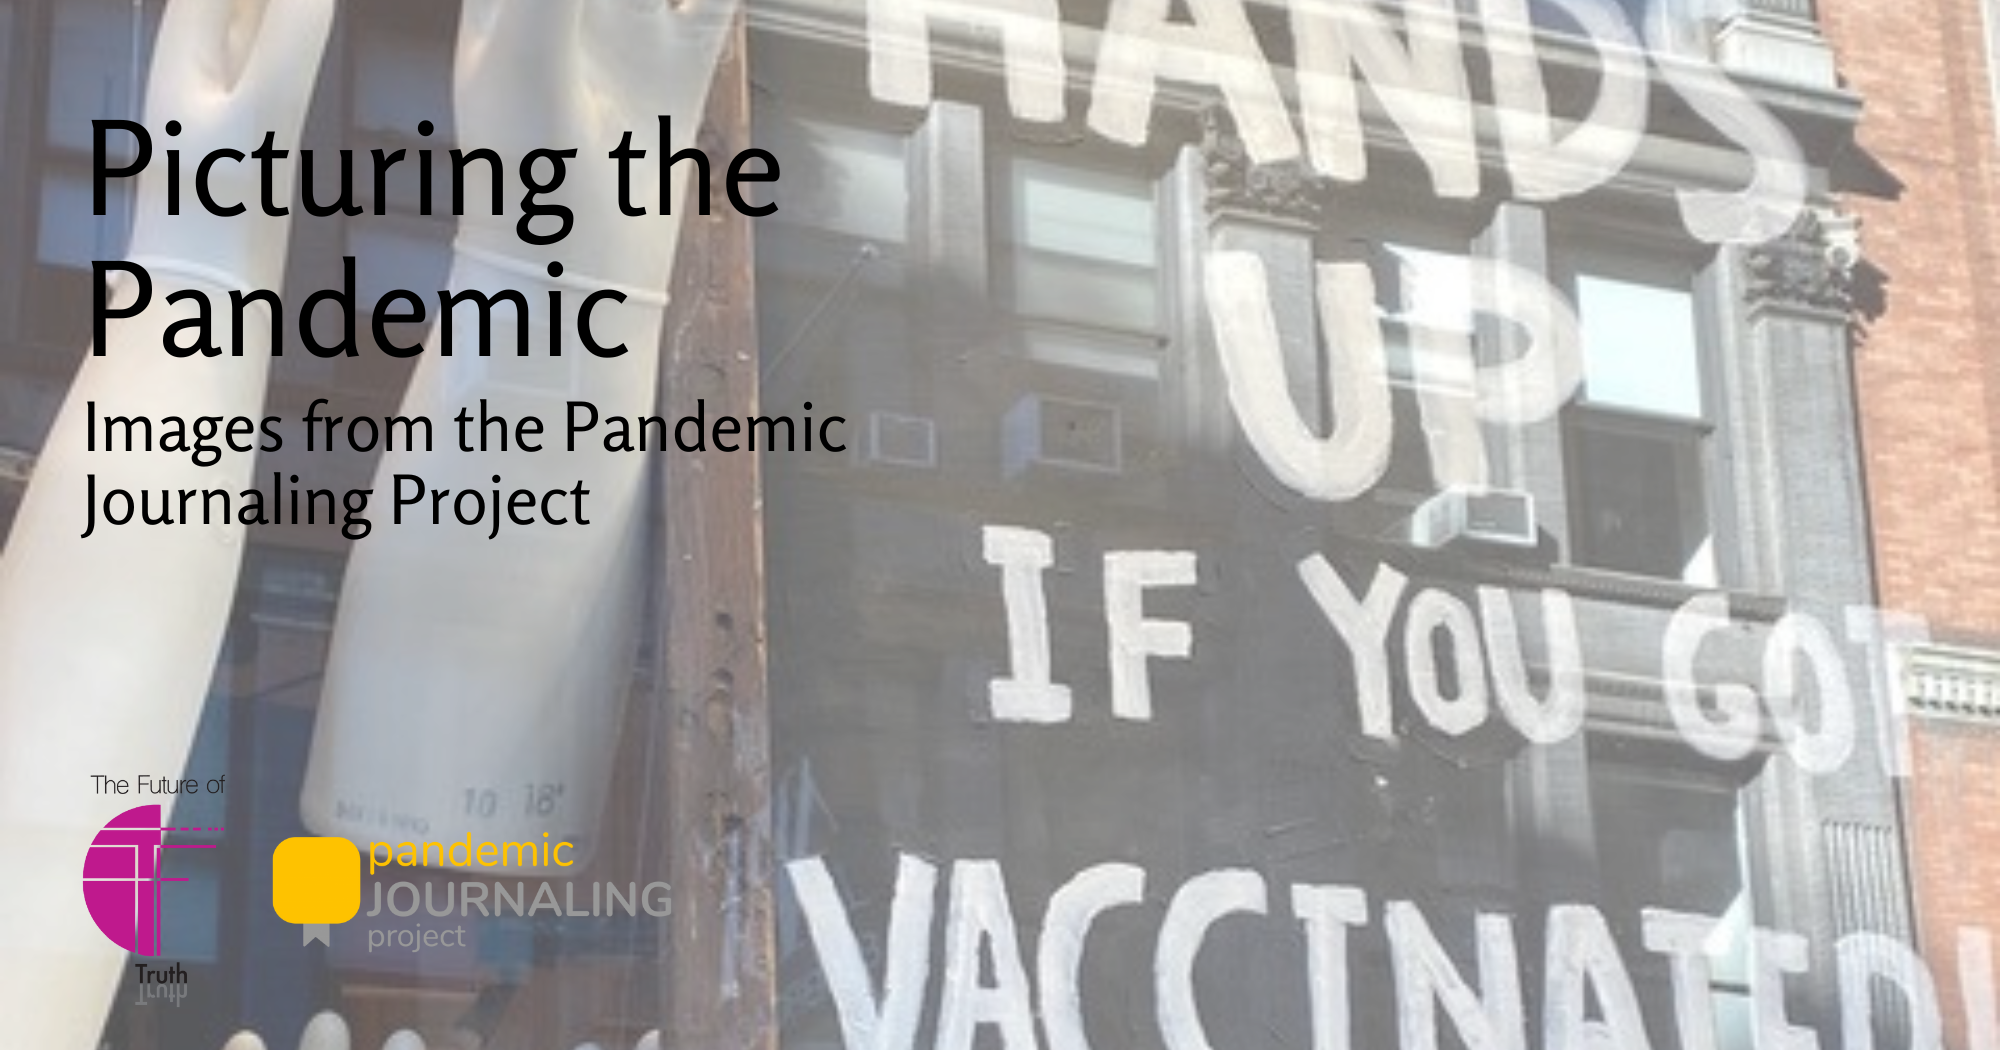 Picturing the Pandemic: Images from the Pandemic Journaling Project